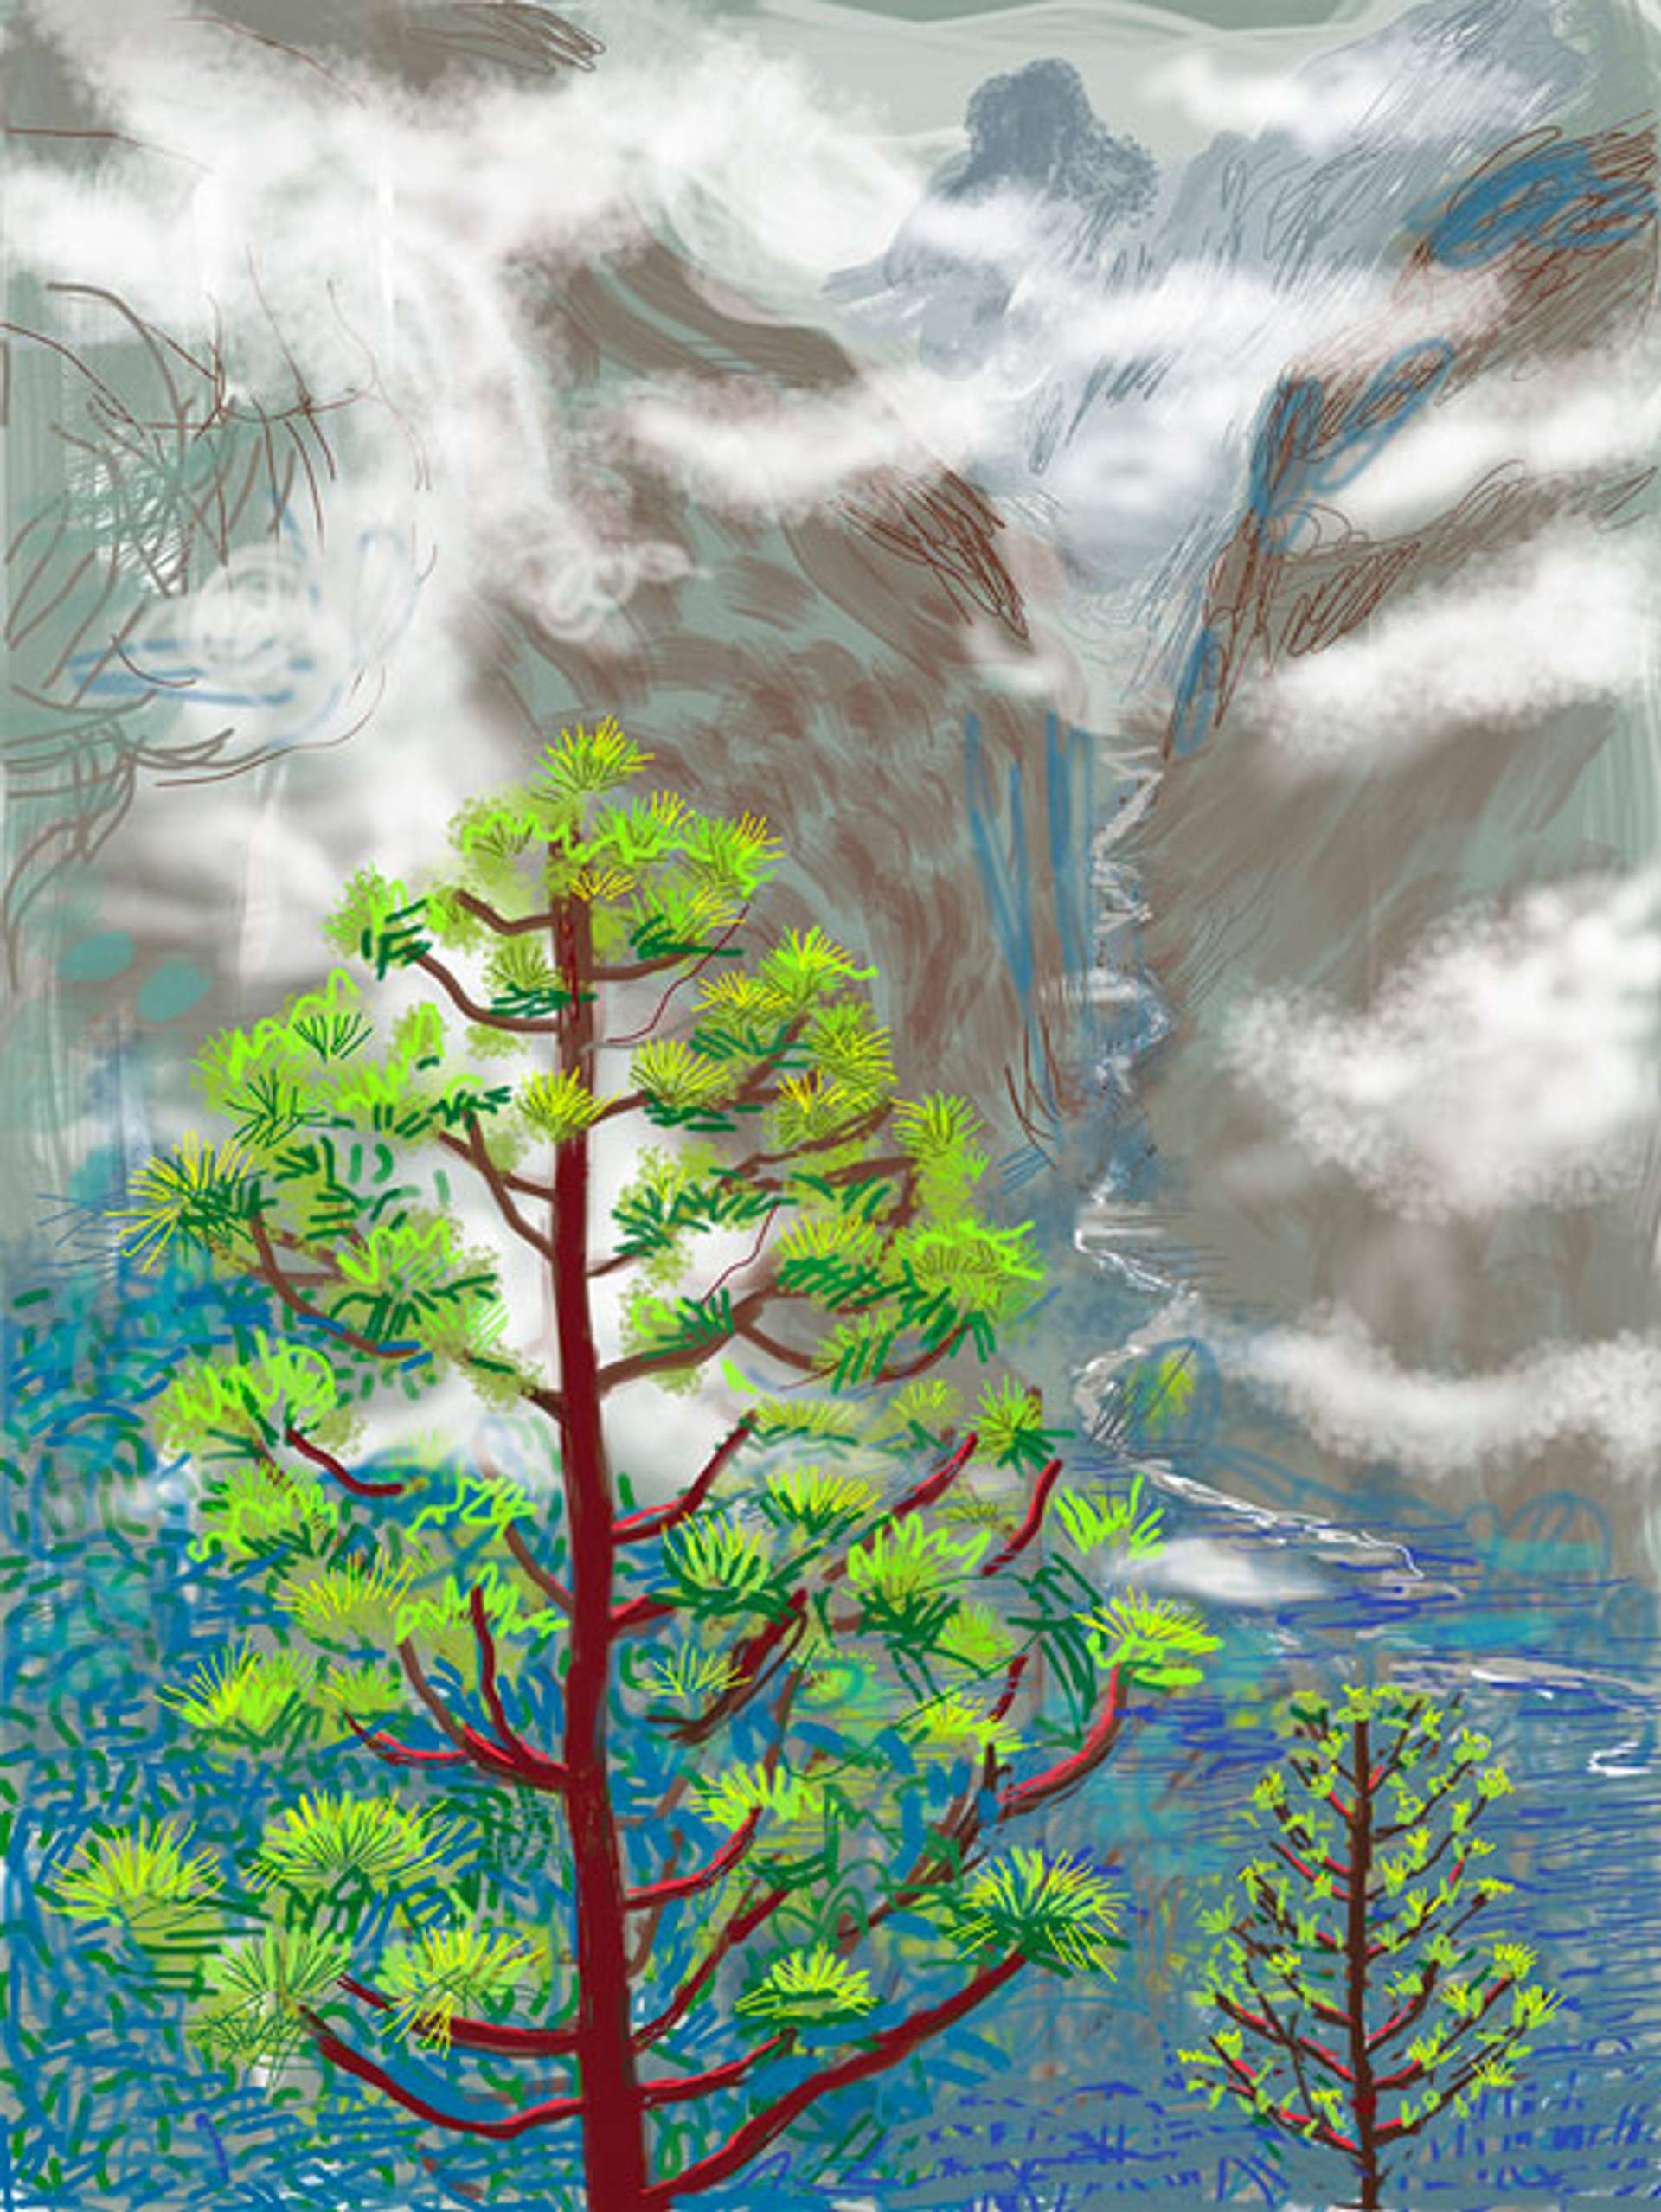 A digital drawing by David Hockney, showing a wooded landscape through the mist. In the distance, a river can be seen snaking through the valley below.